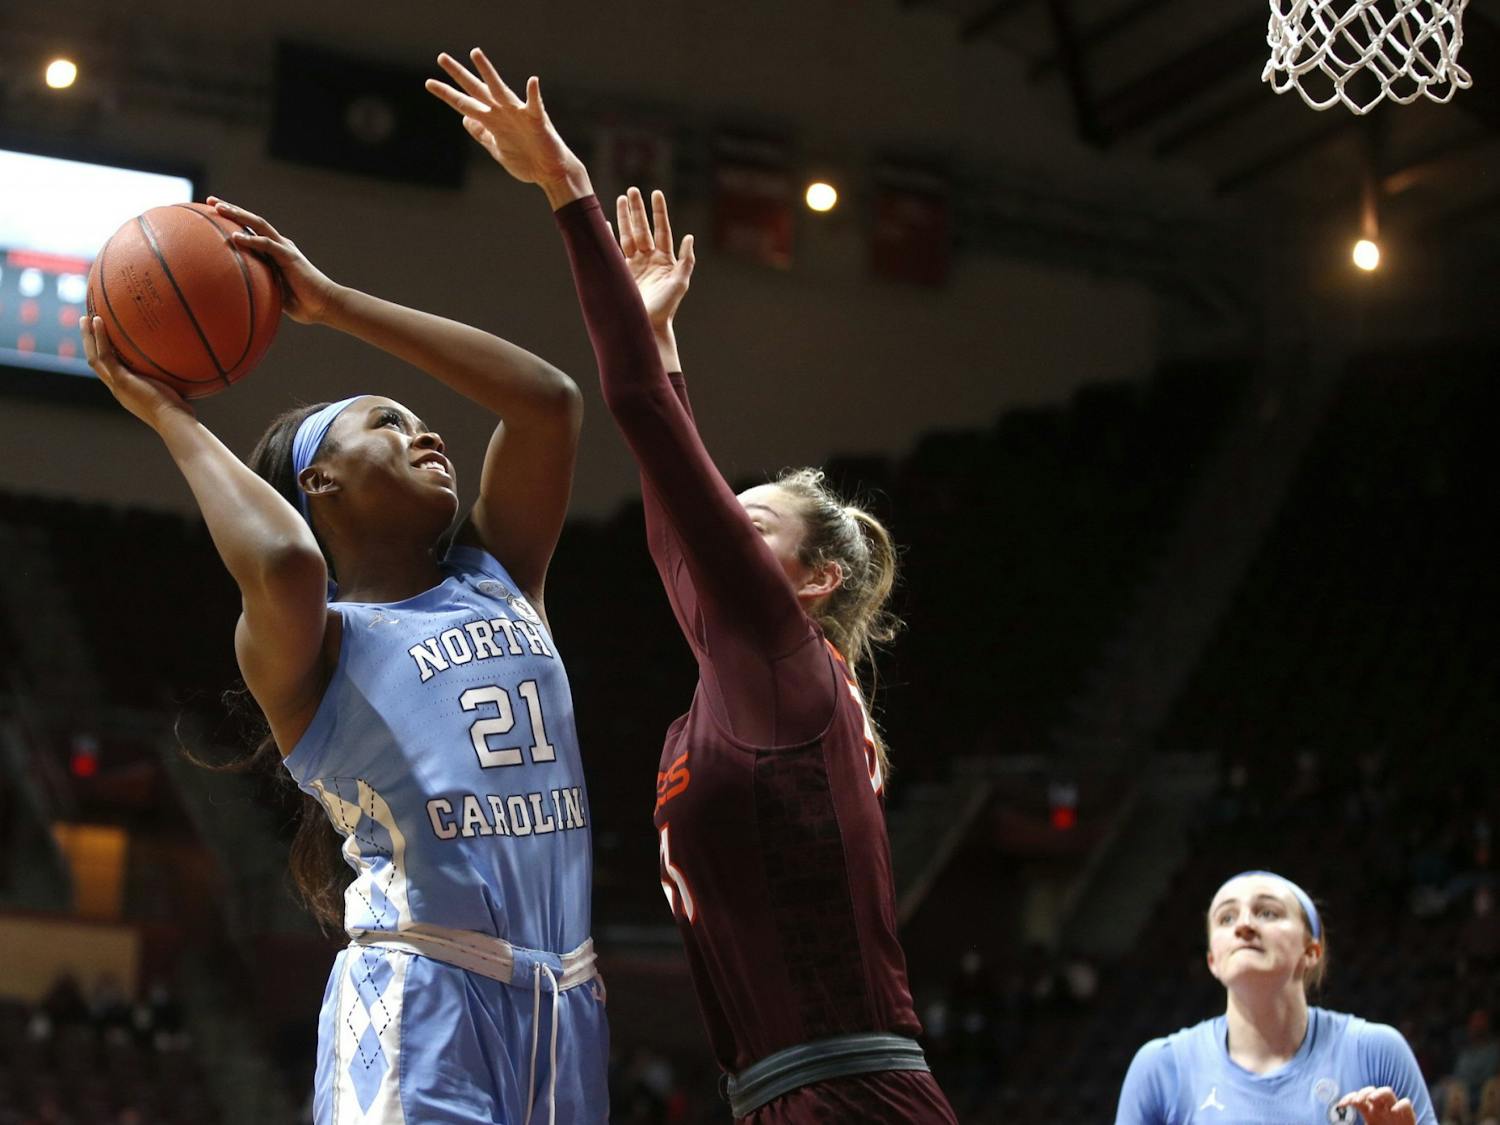 UNC's sophomore forward Malu Tshitenge (21) attempts a layup during a game against Virginia Tech on Sunday, Jan. 31, 2021. UNC fell to VT 69-73. Photo courtesy of Jon Fleming.